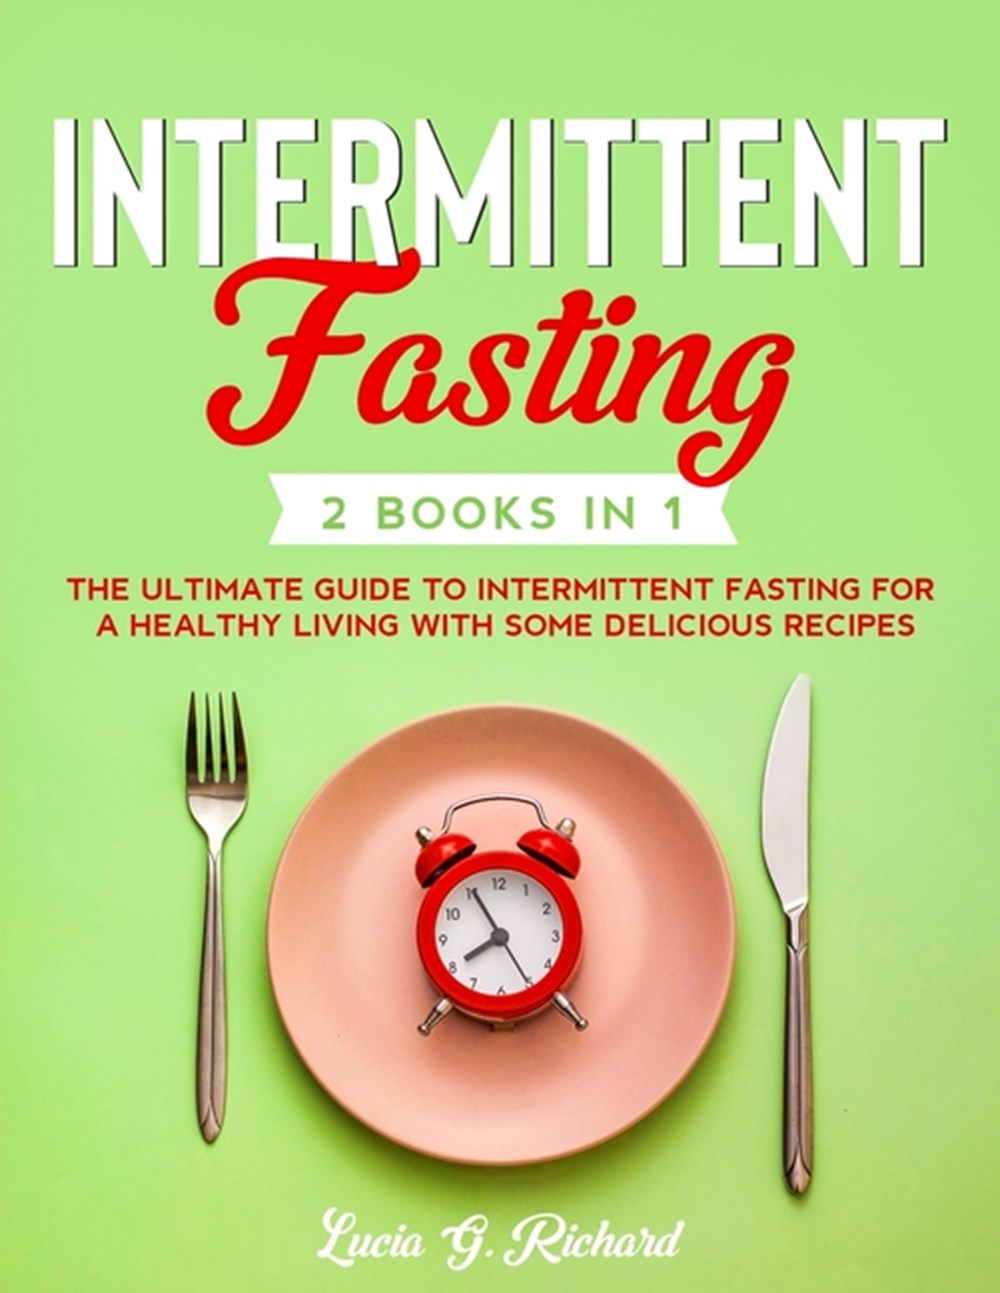 Intermittent Fasting: 2 Books in 1 - The Ultimate Guide to Intermittent Fasting for a Healthy Living